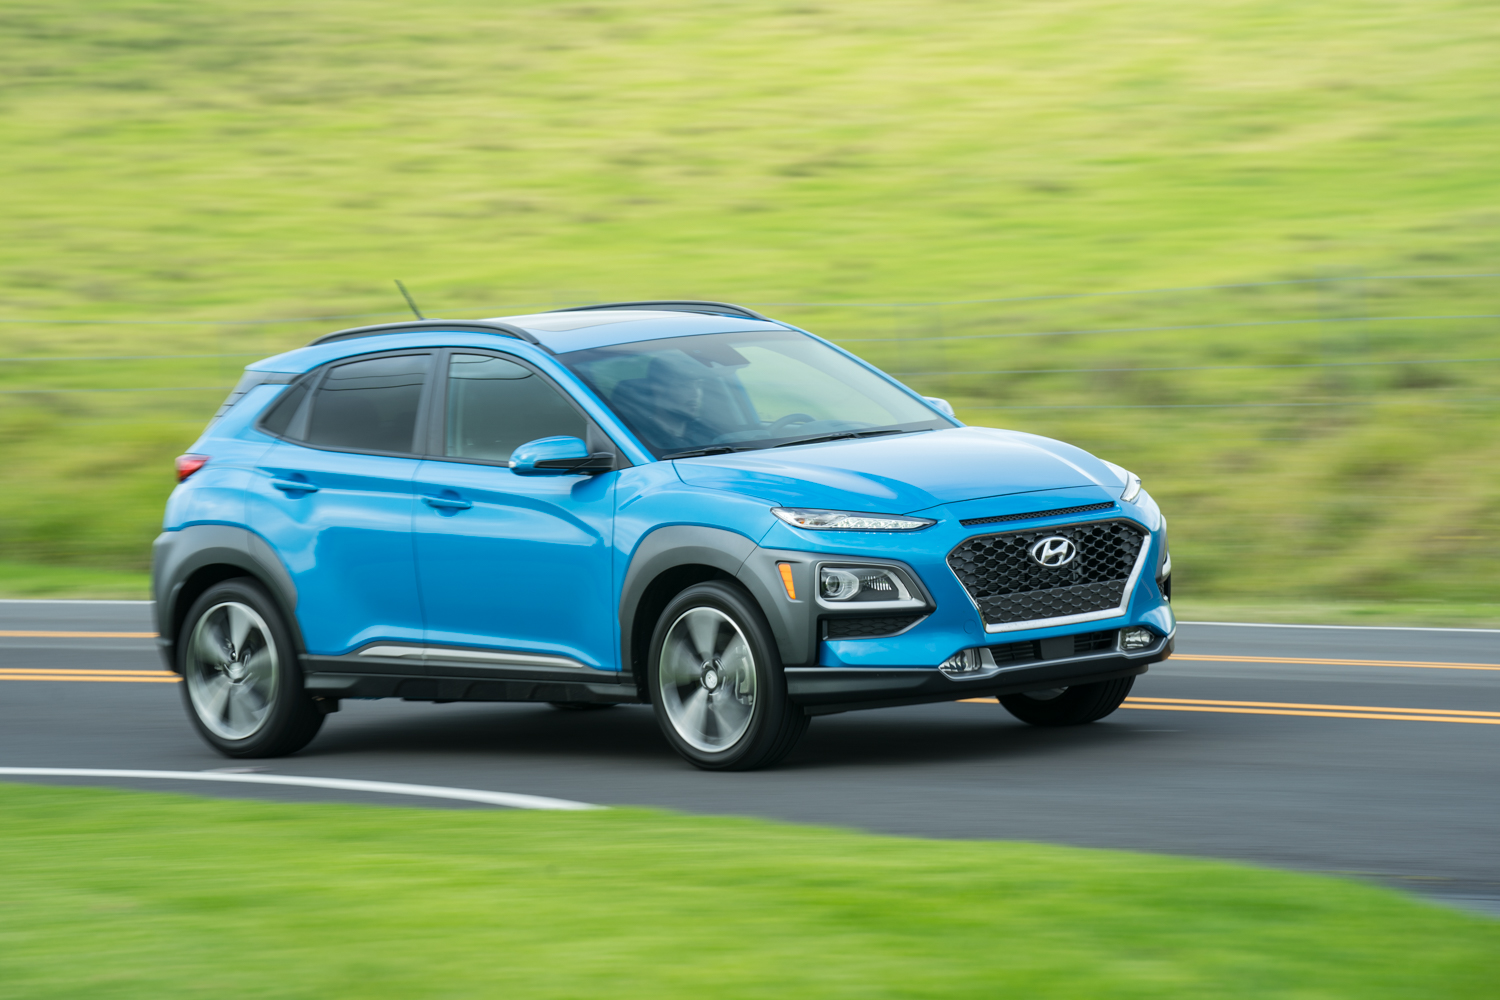 The 2021 Hyundai Kona driving around a curve of a road